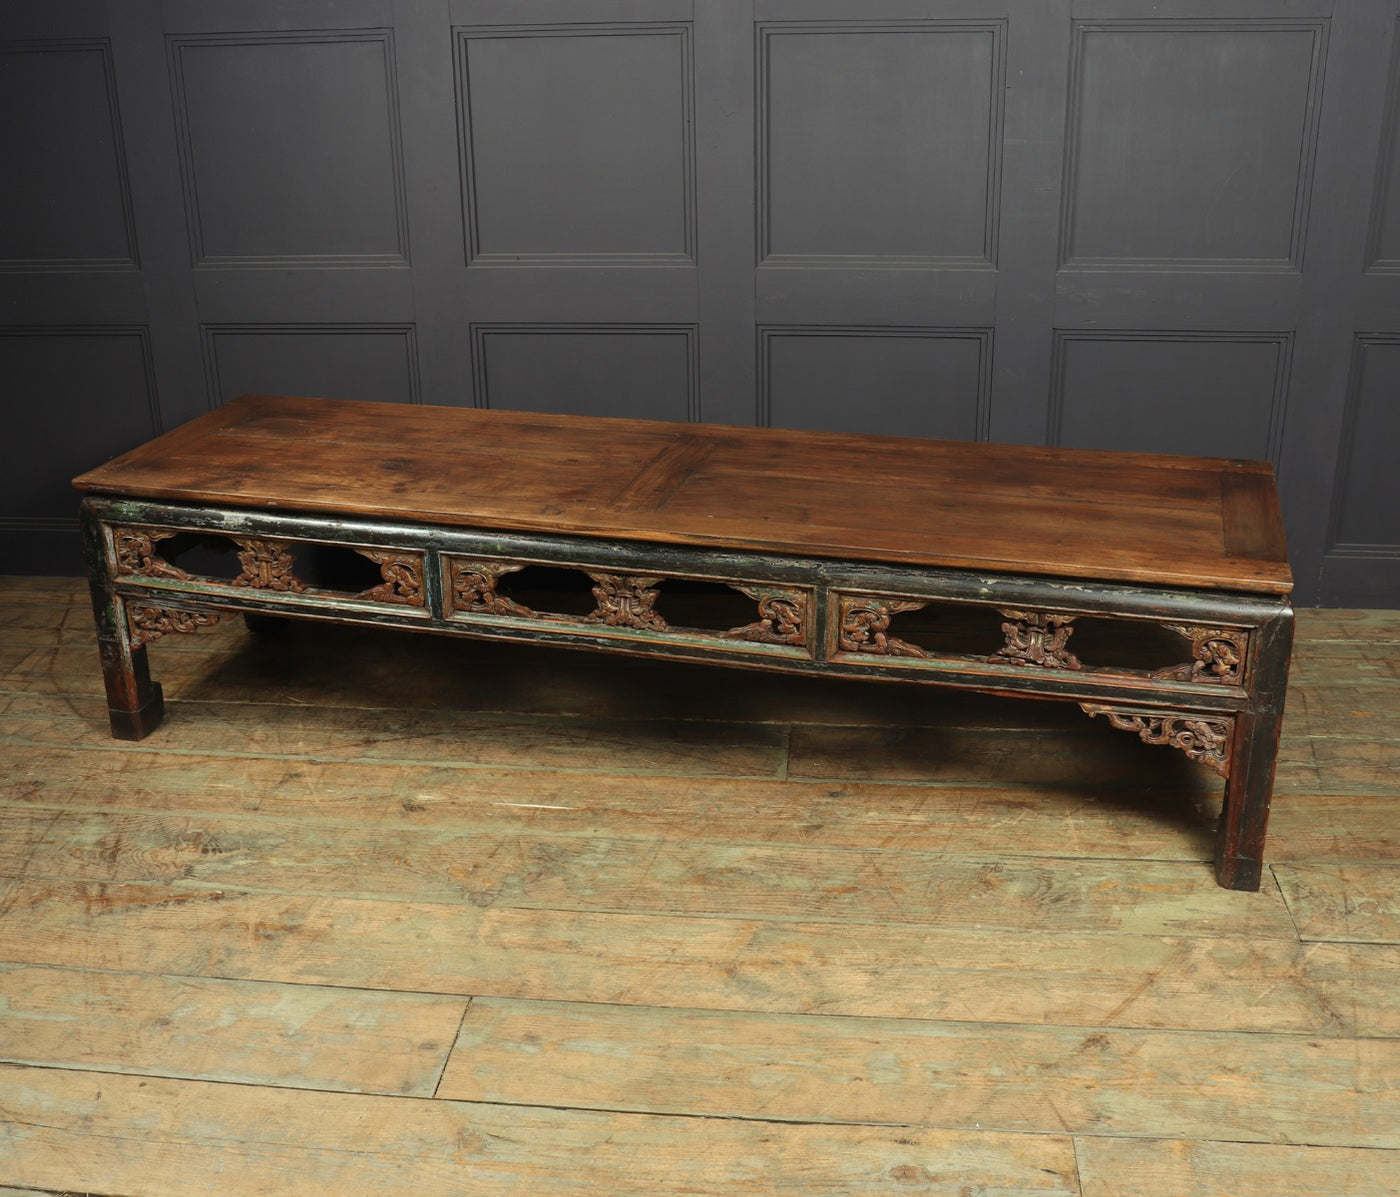 Antique painted Chinese Coffee Table Shanxi